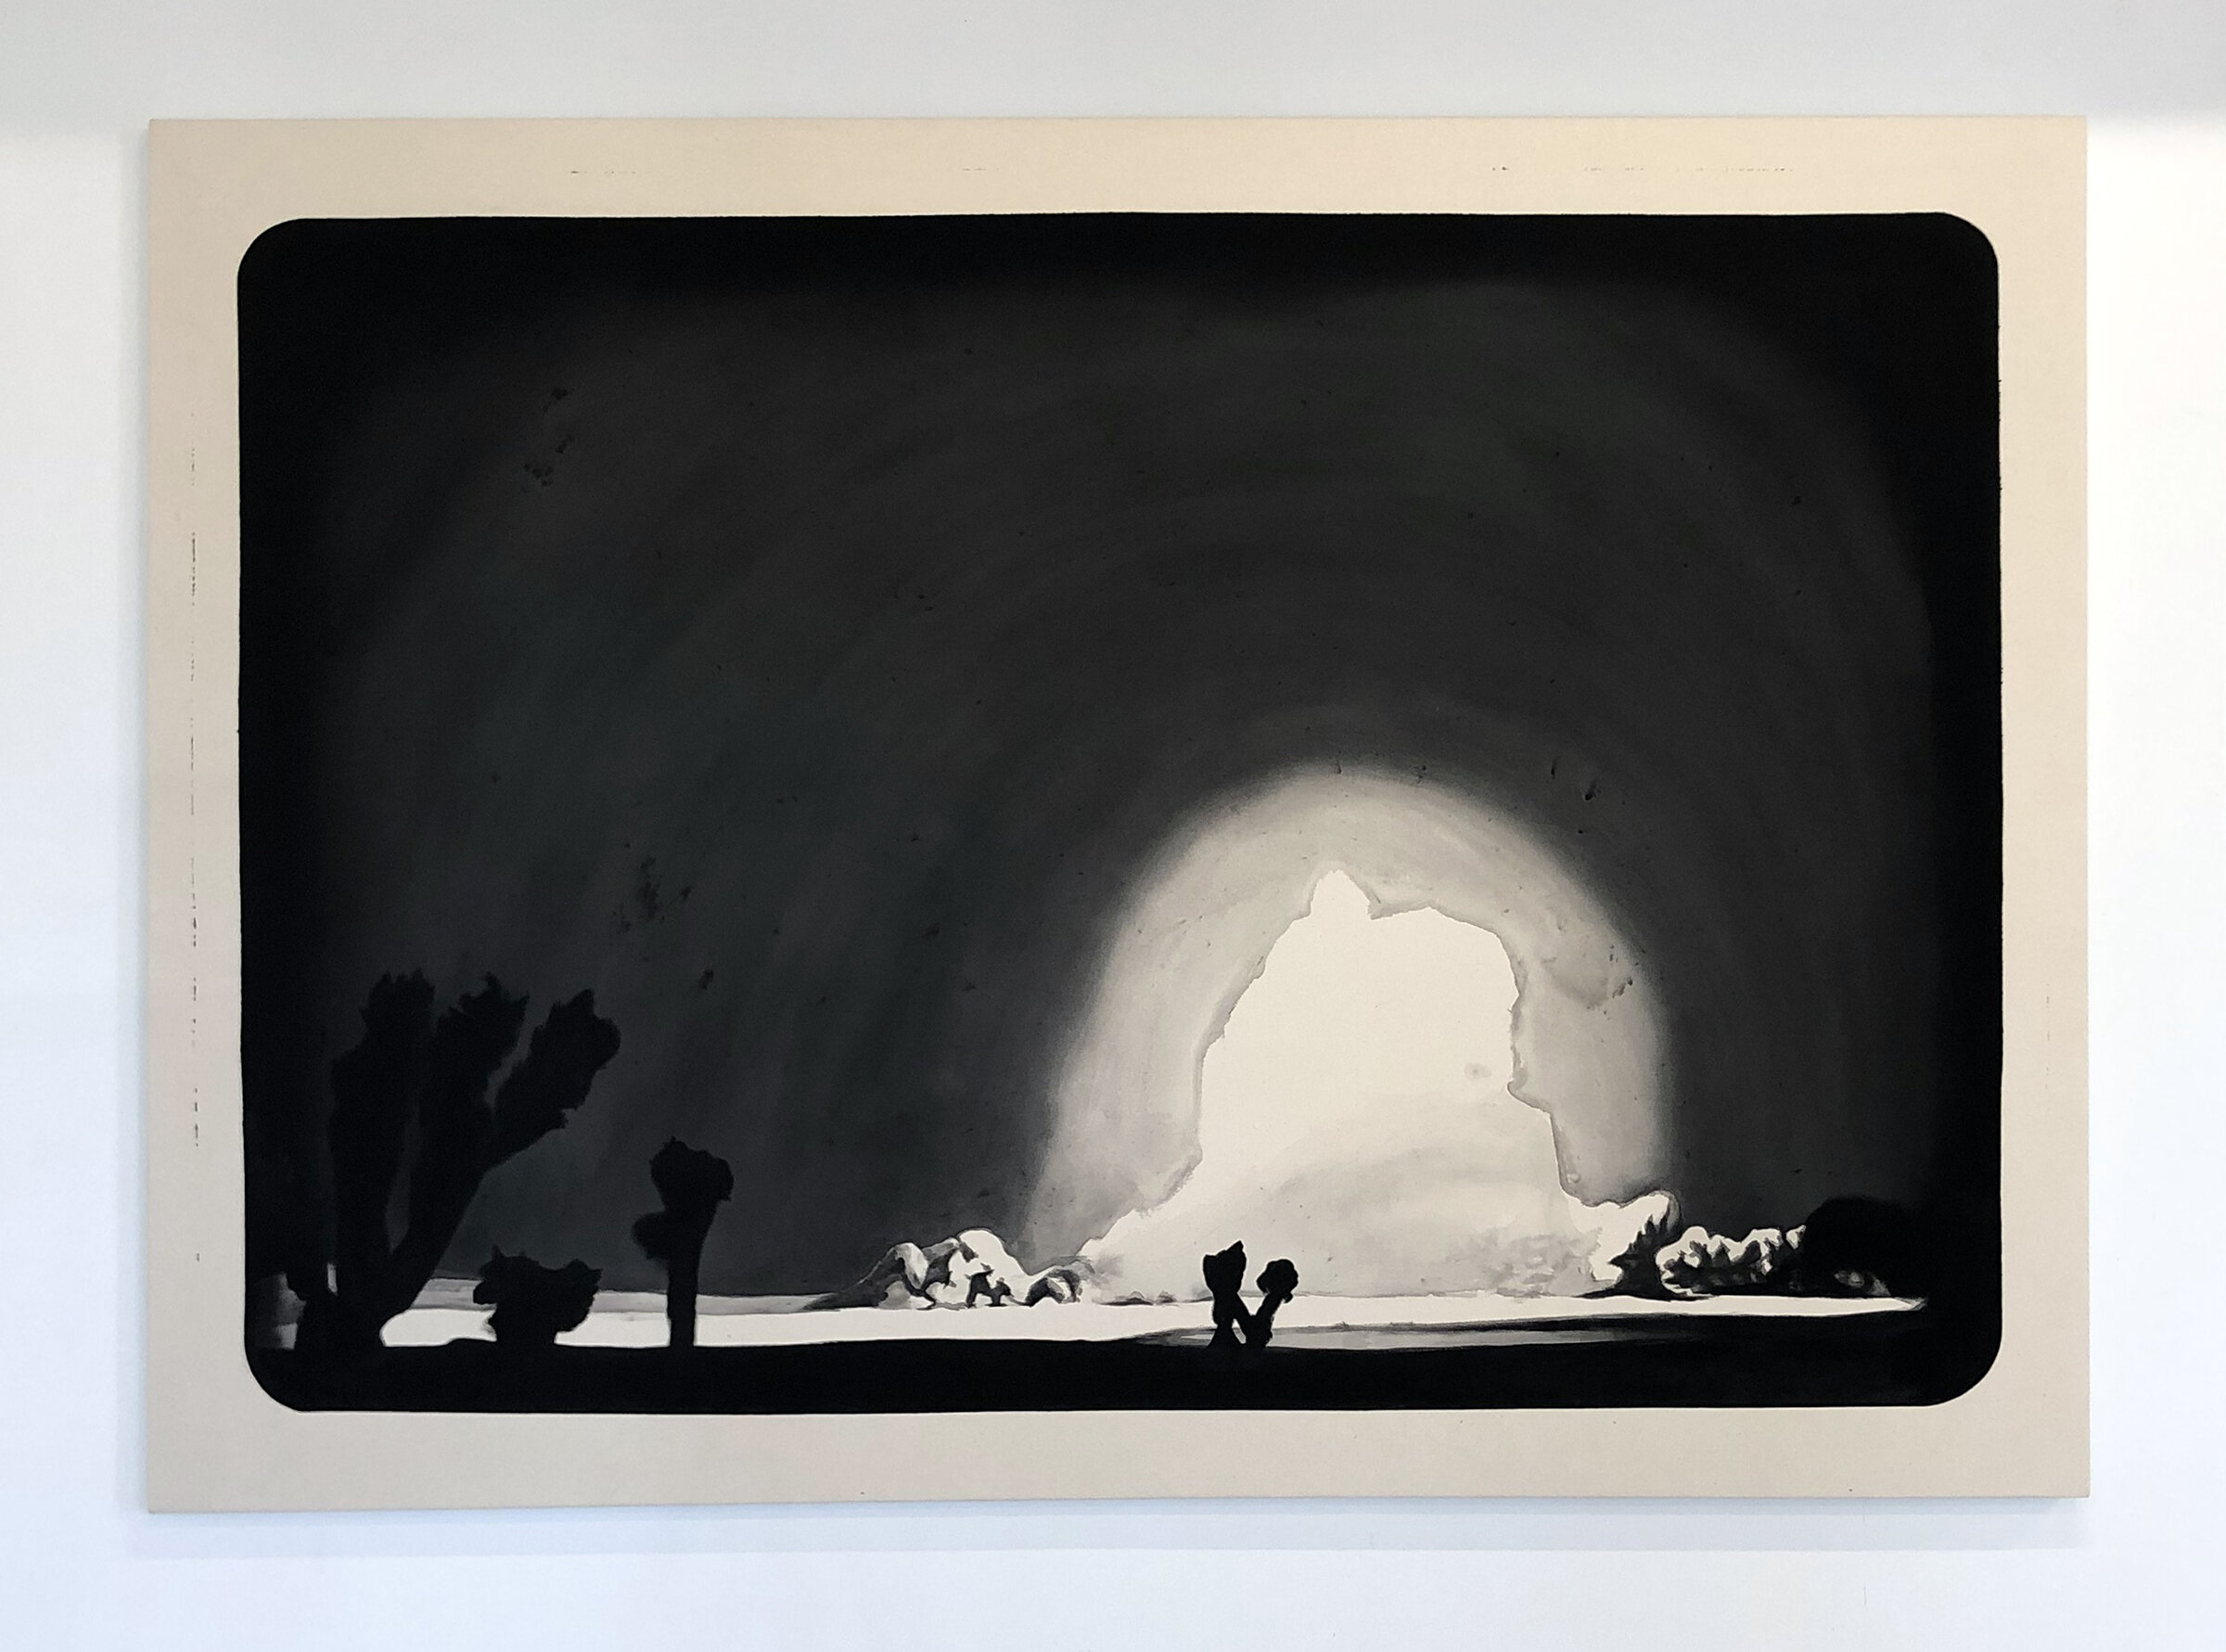   A Set For A Play , 2020 Black gesso on canvas 58 x 80 inches (1.47m x 2.03m) 